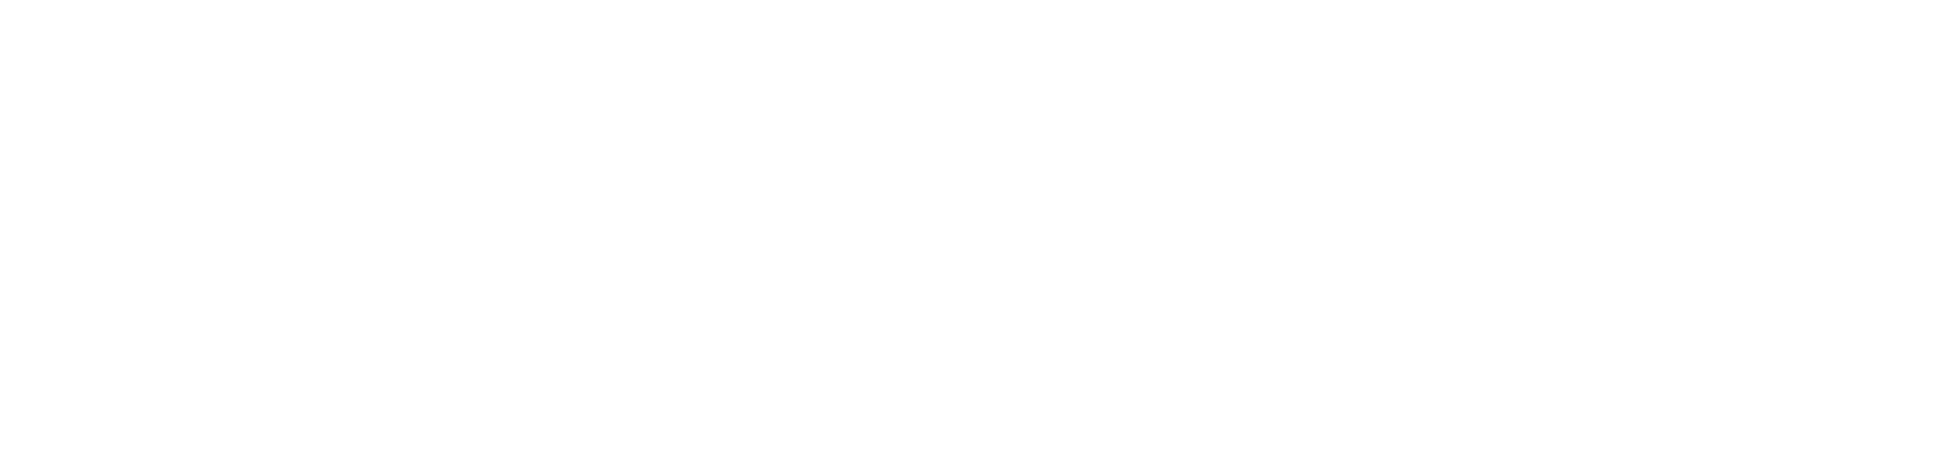 tax-counsel-23142168-montana-department-of-revenue